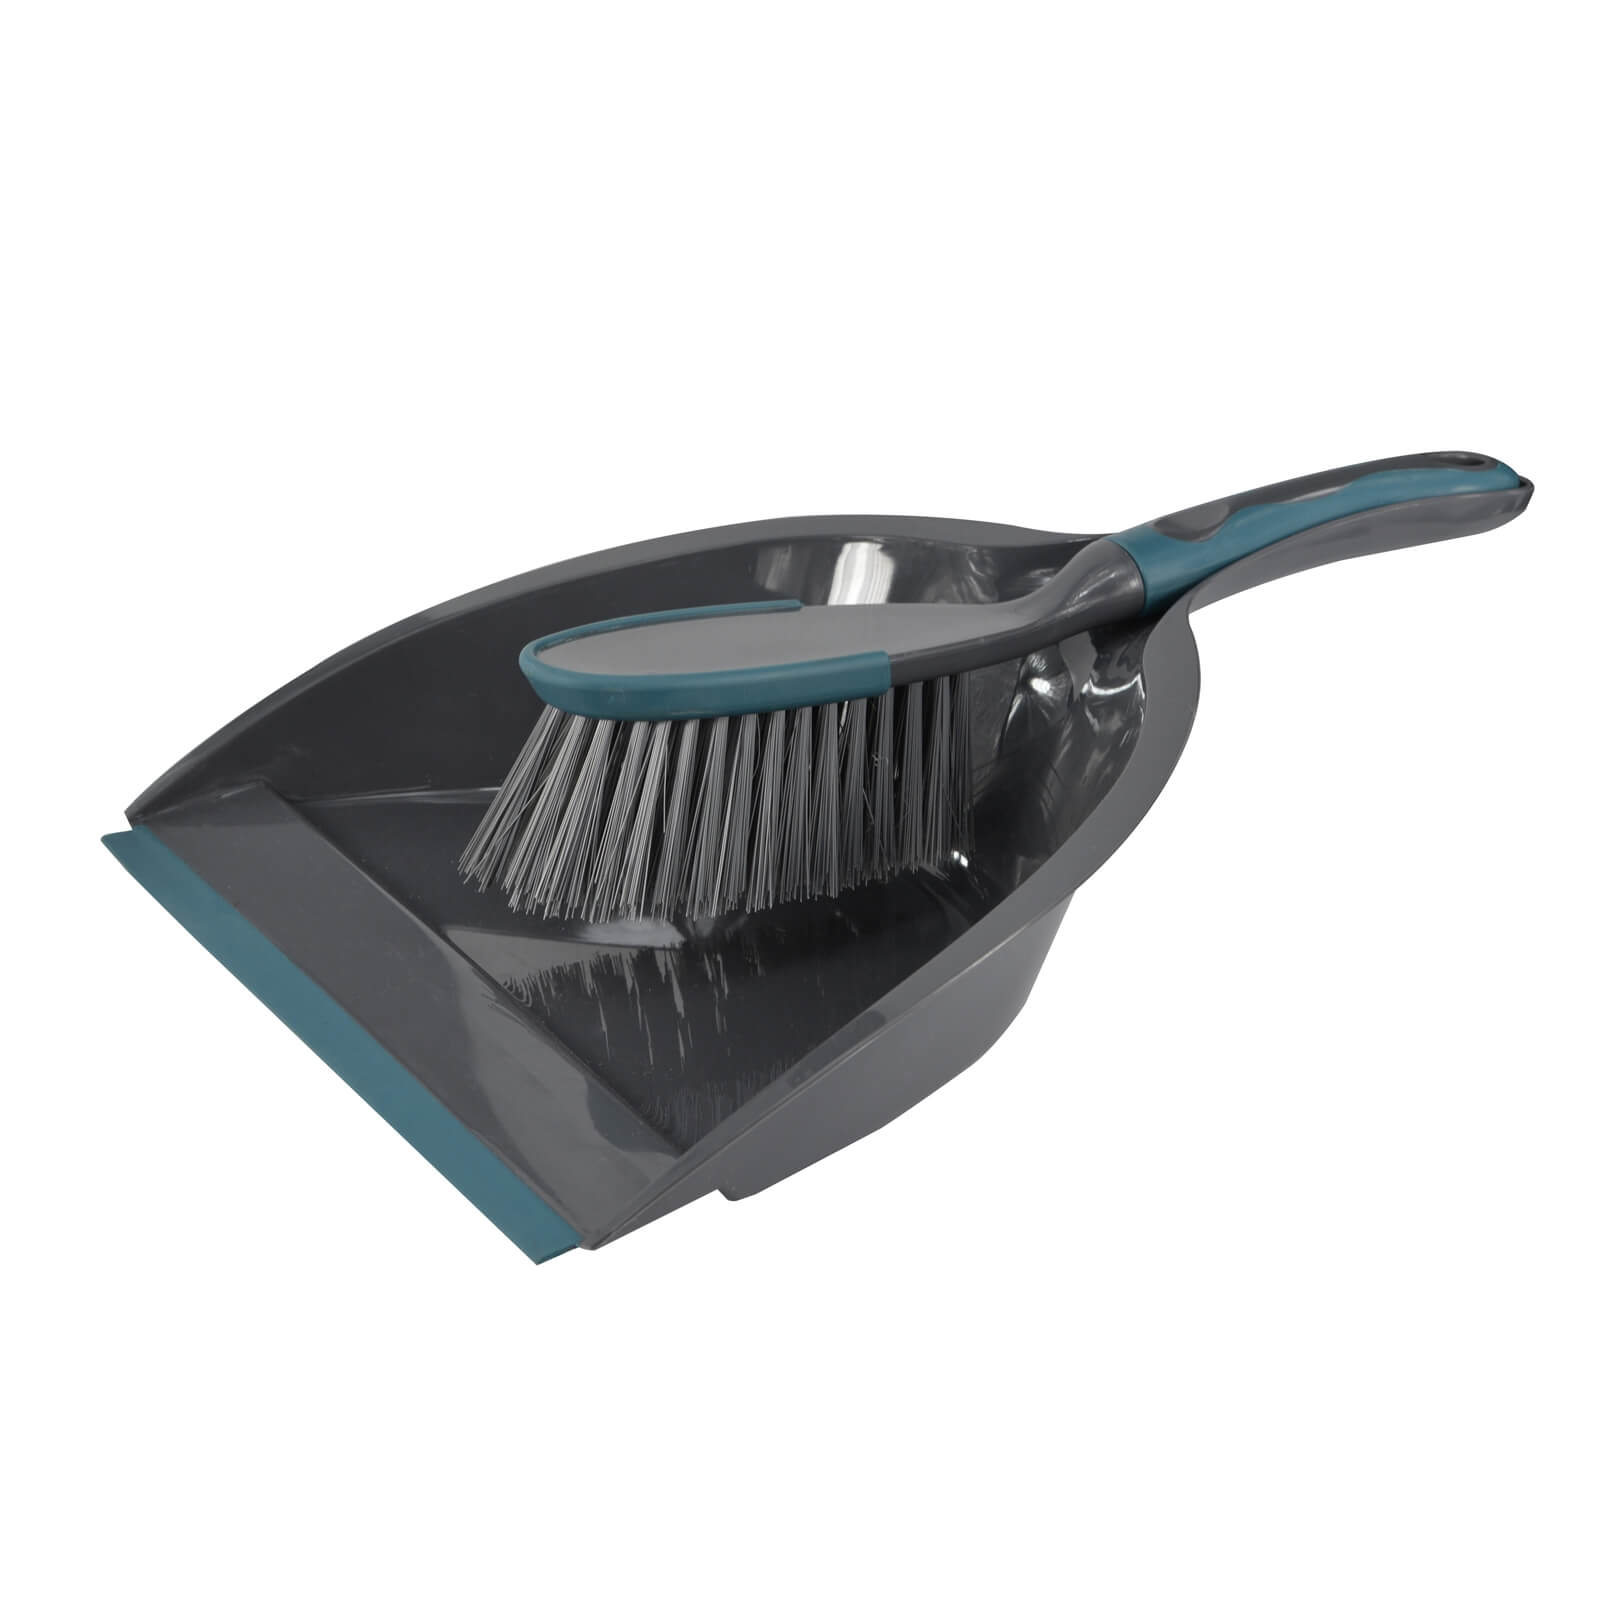 Dustpan & Brush with Soft Grip Handle